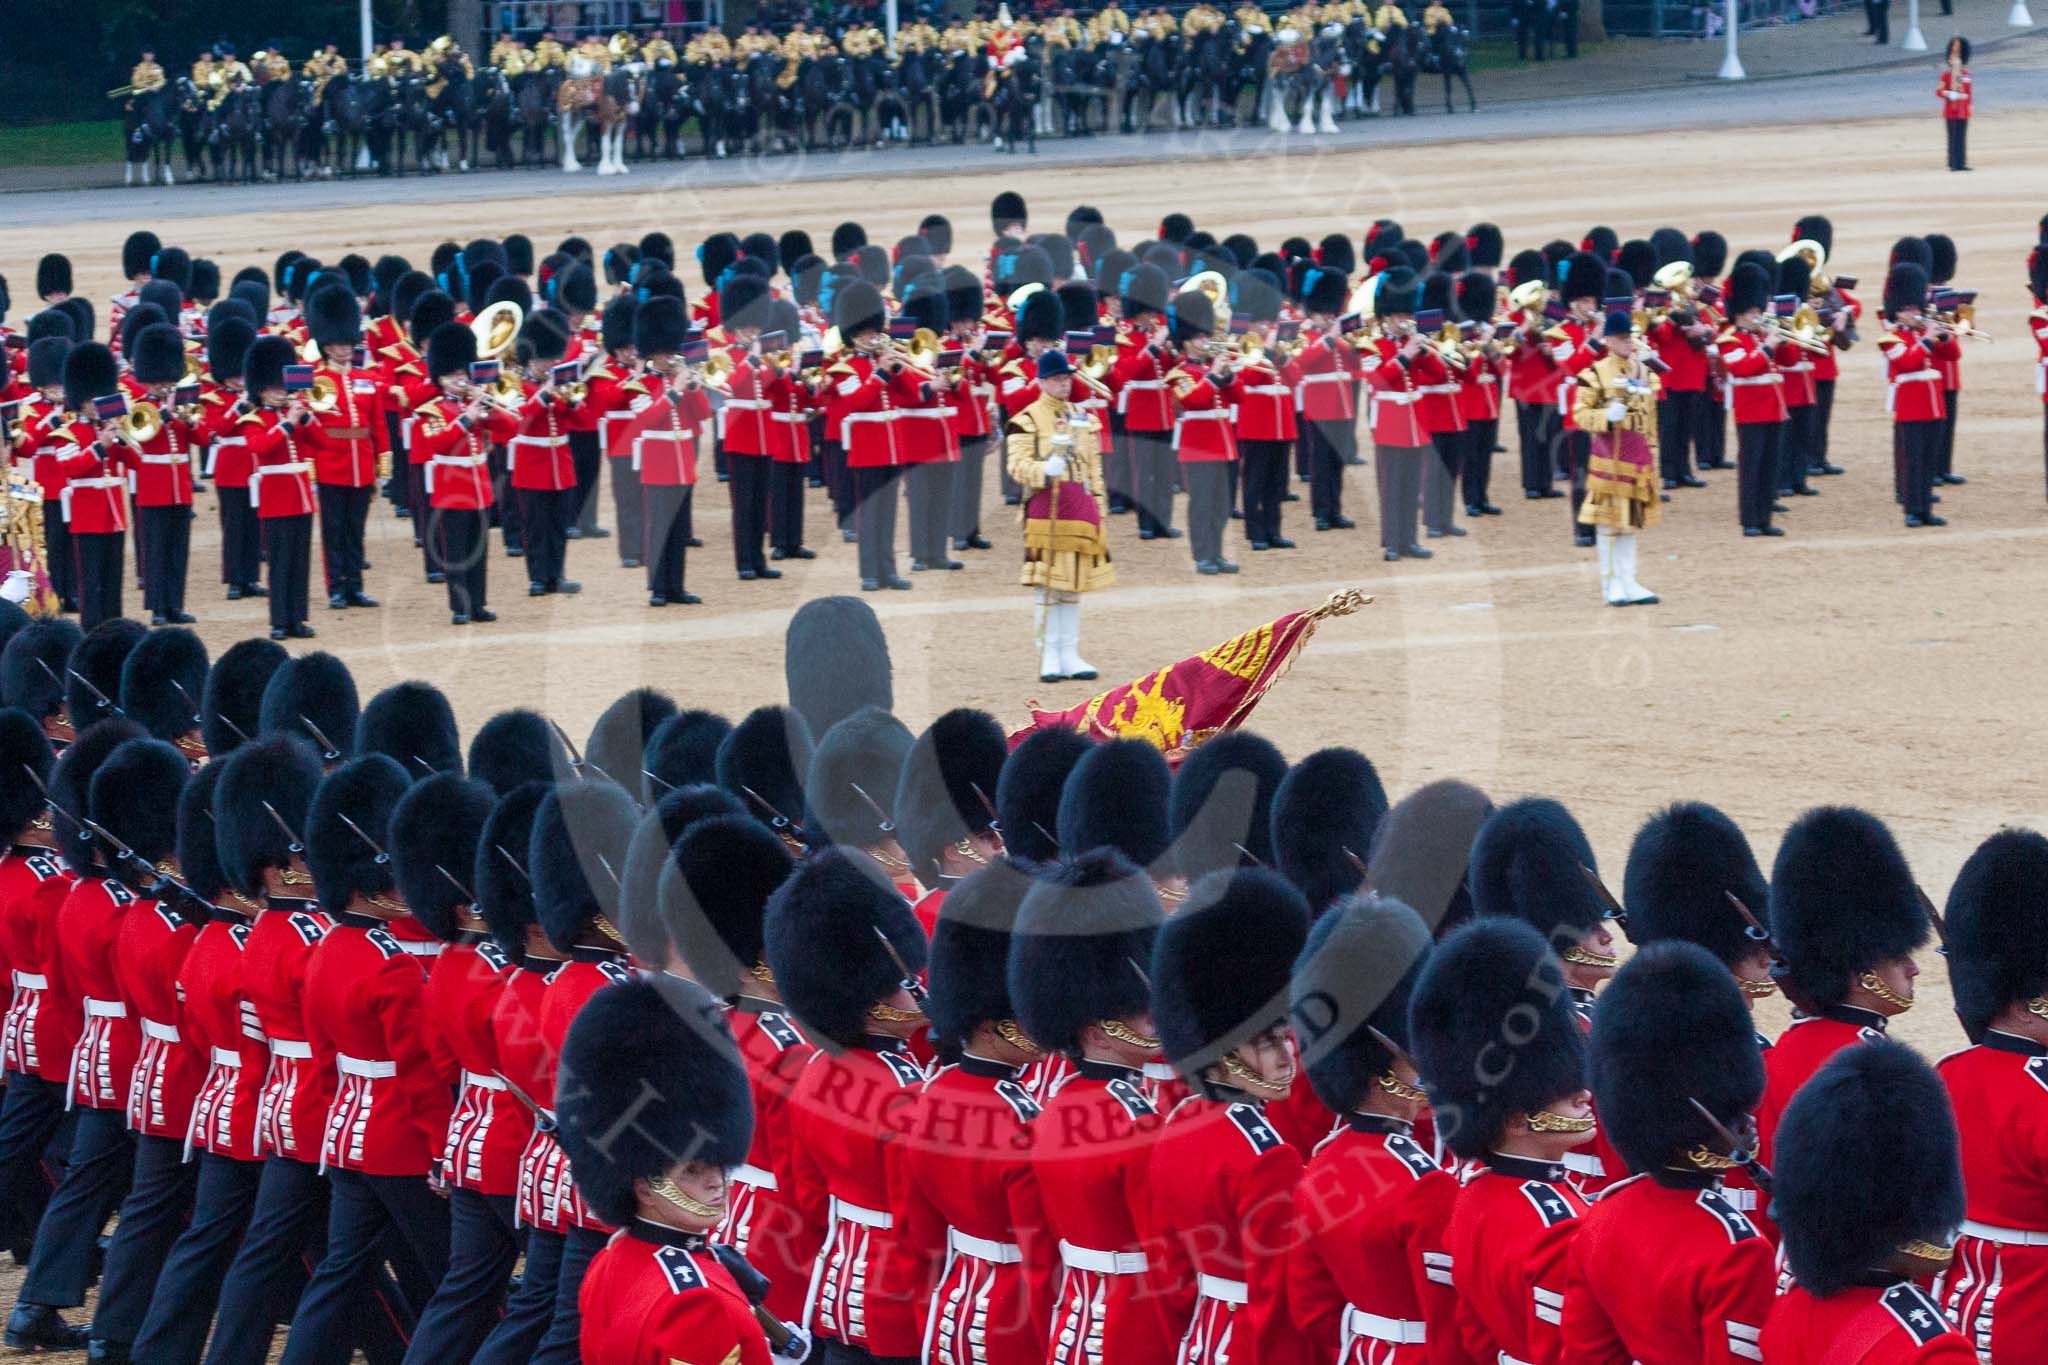 Trooping the Colour 2015. Image #457, 13 June 2015 11:35 Horse Guards Parade, London, UK